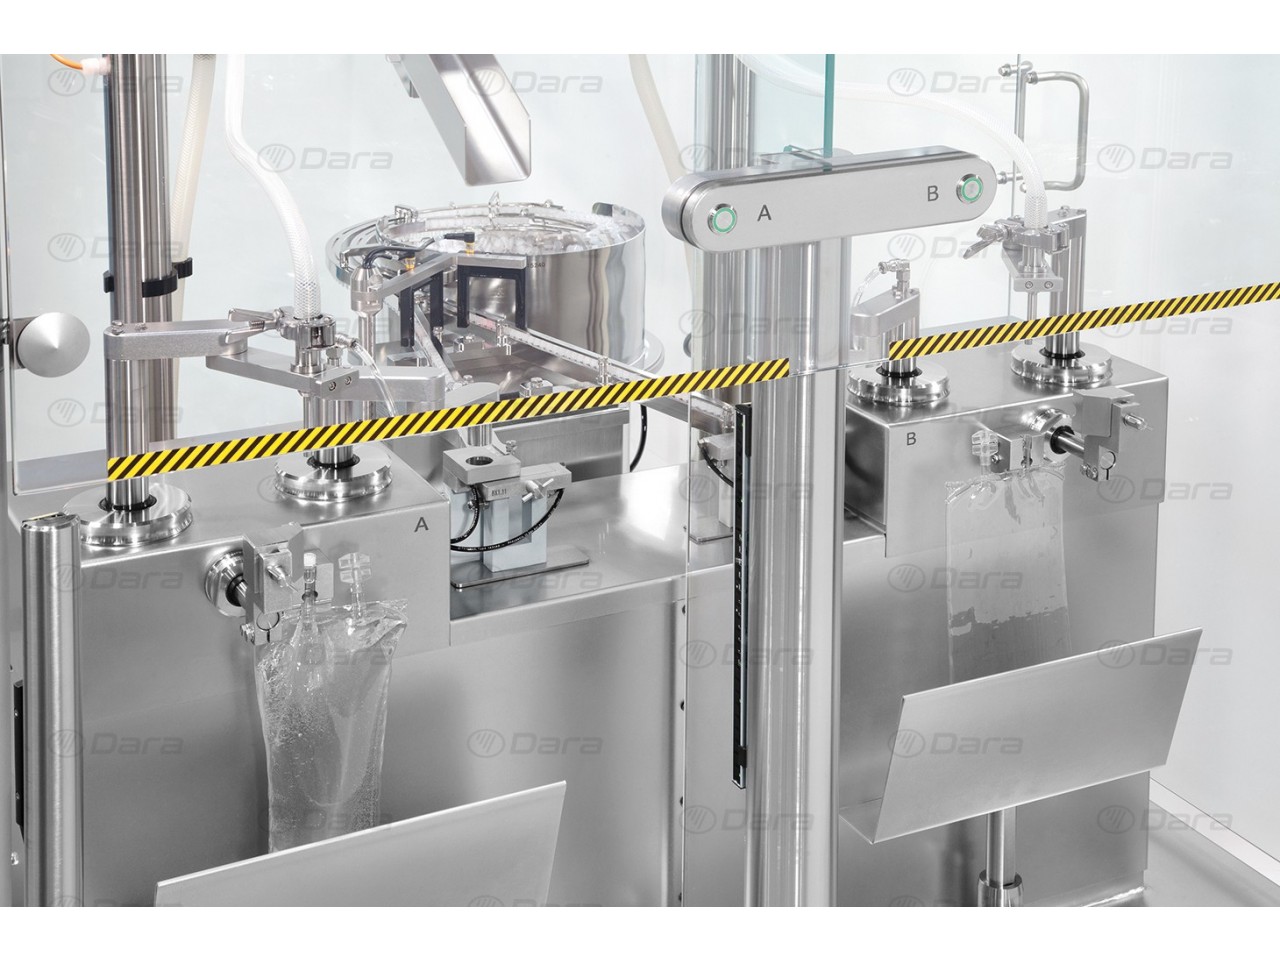 Compact machine for automatic filling and closing of IV bags